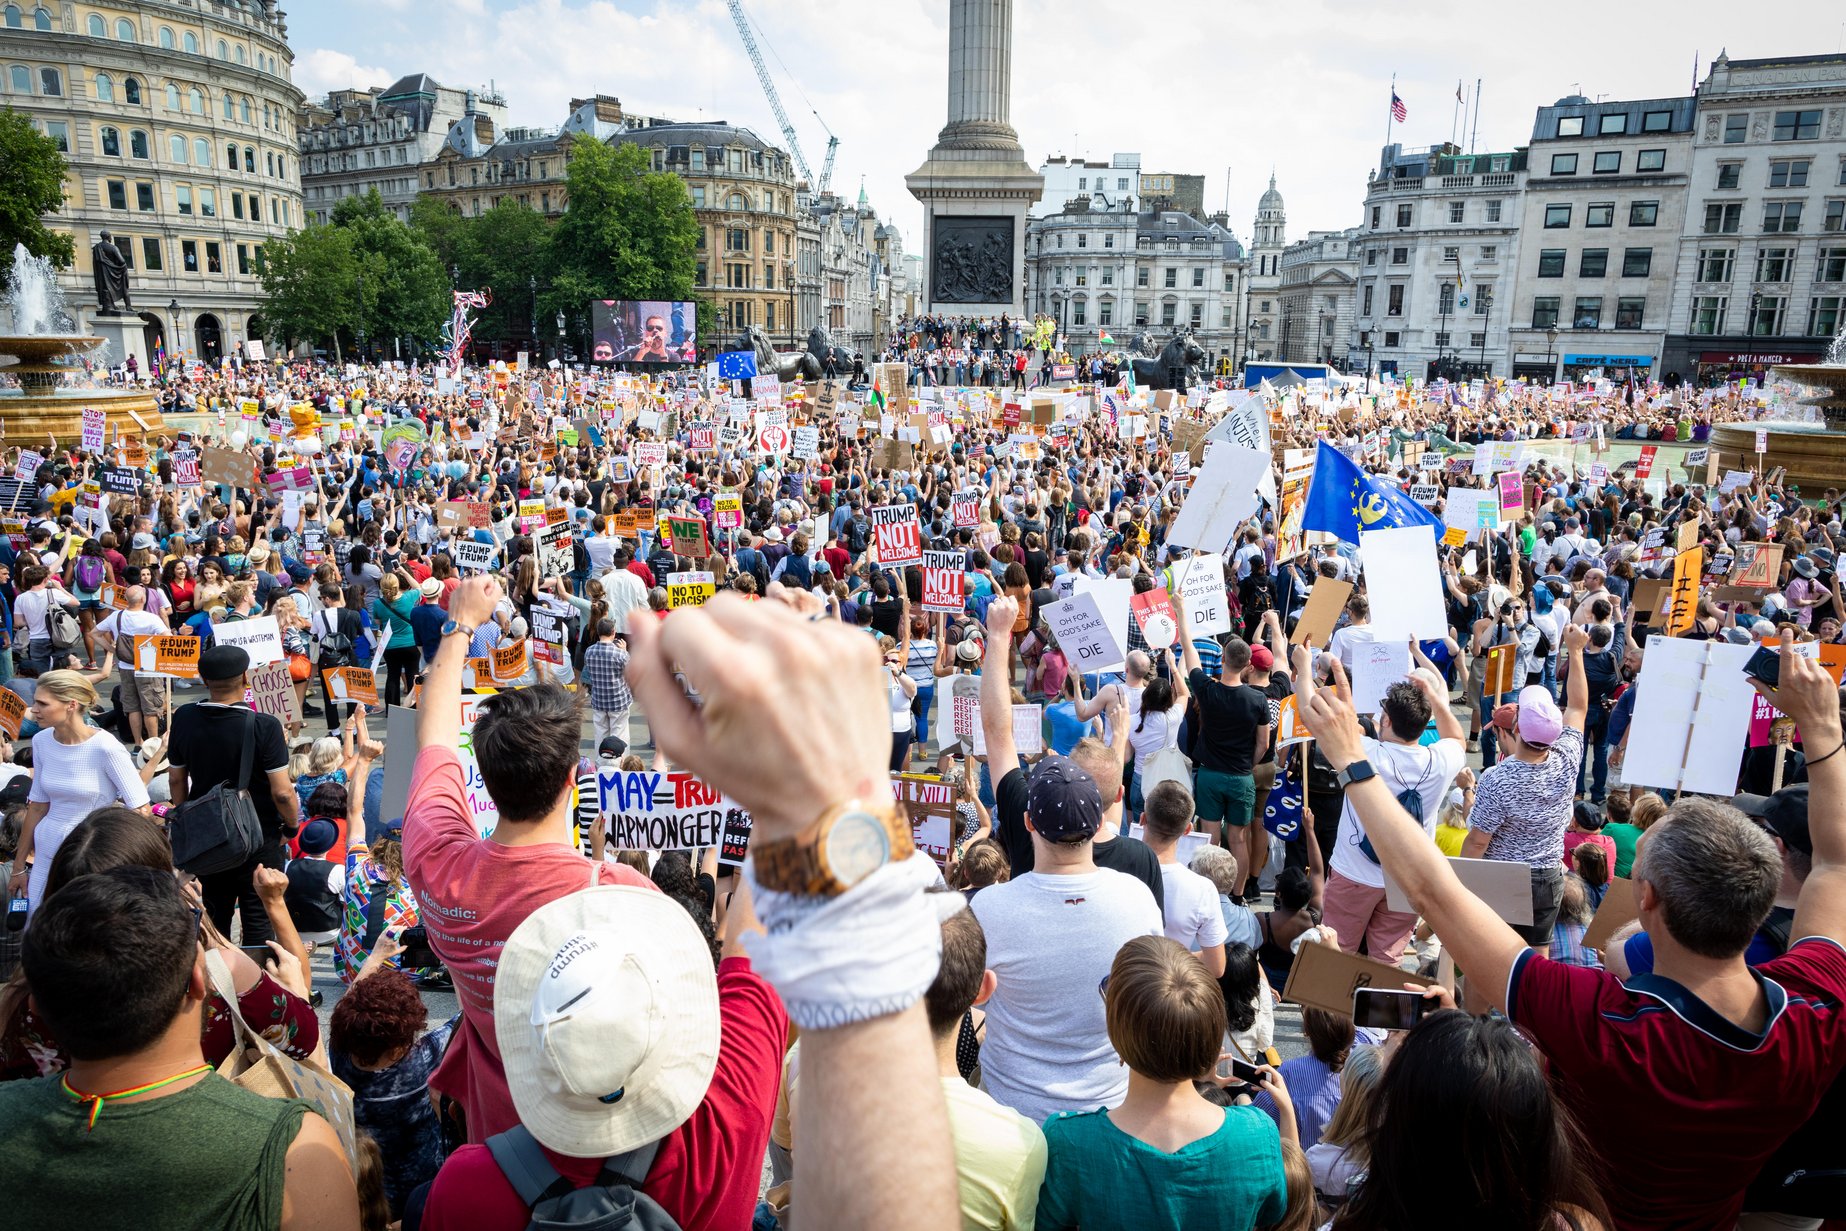 Tens of thousands of demonstrators take to the streets to protest in Trafalgar Square, London